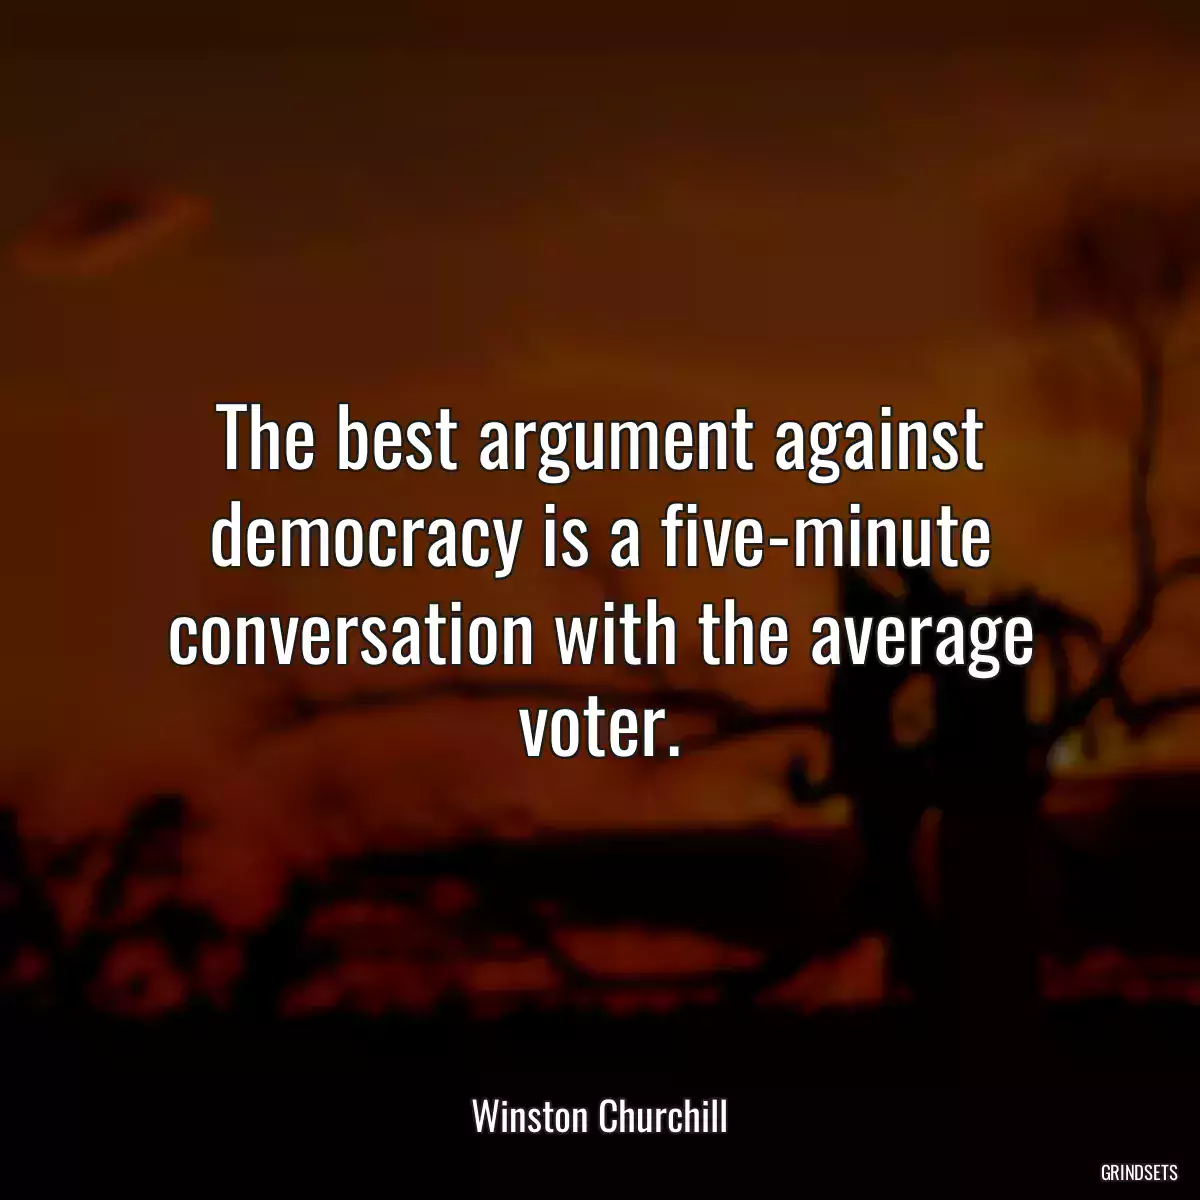 The best argument against democracy is a five-minute conversation with the average voter.